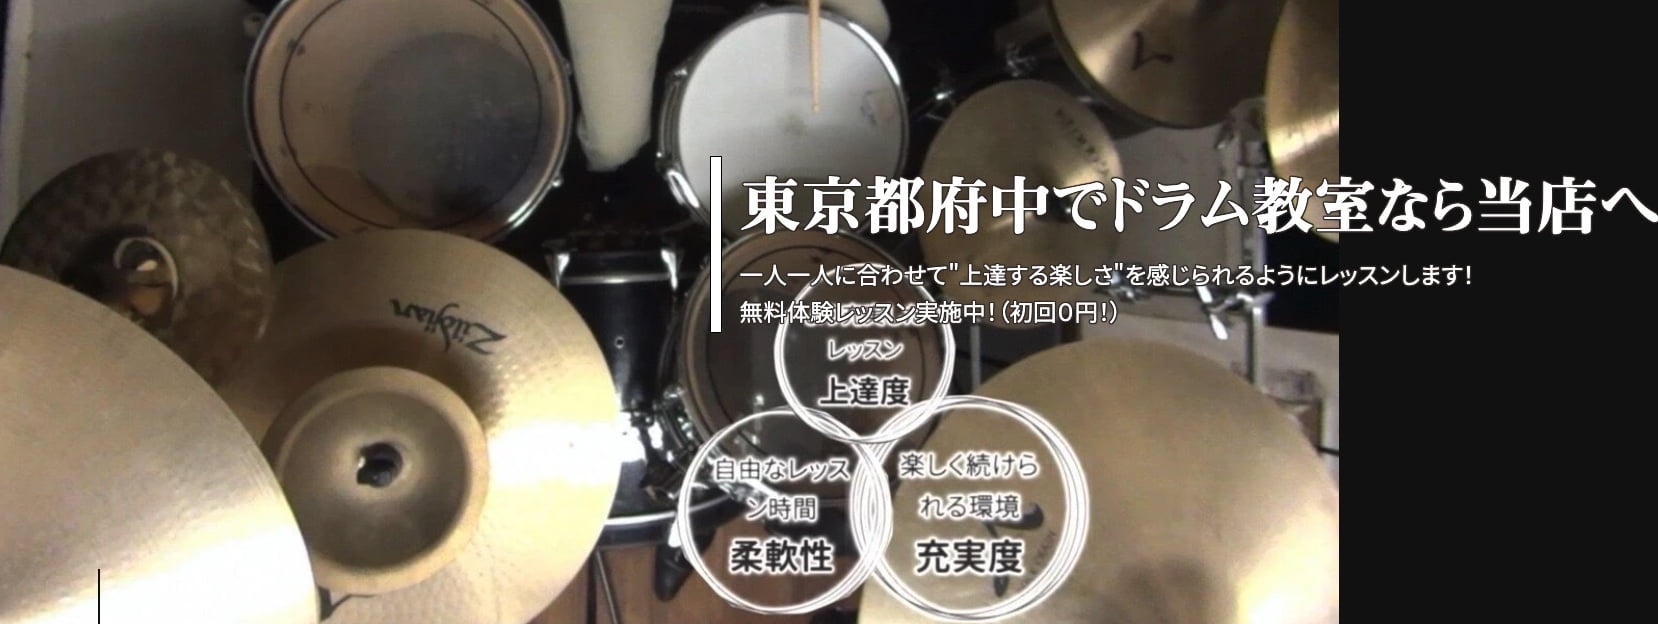 Drums&Percussionスクール安田